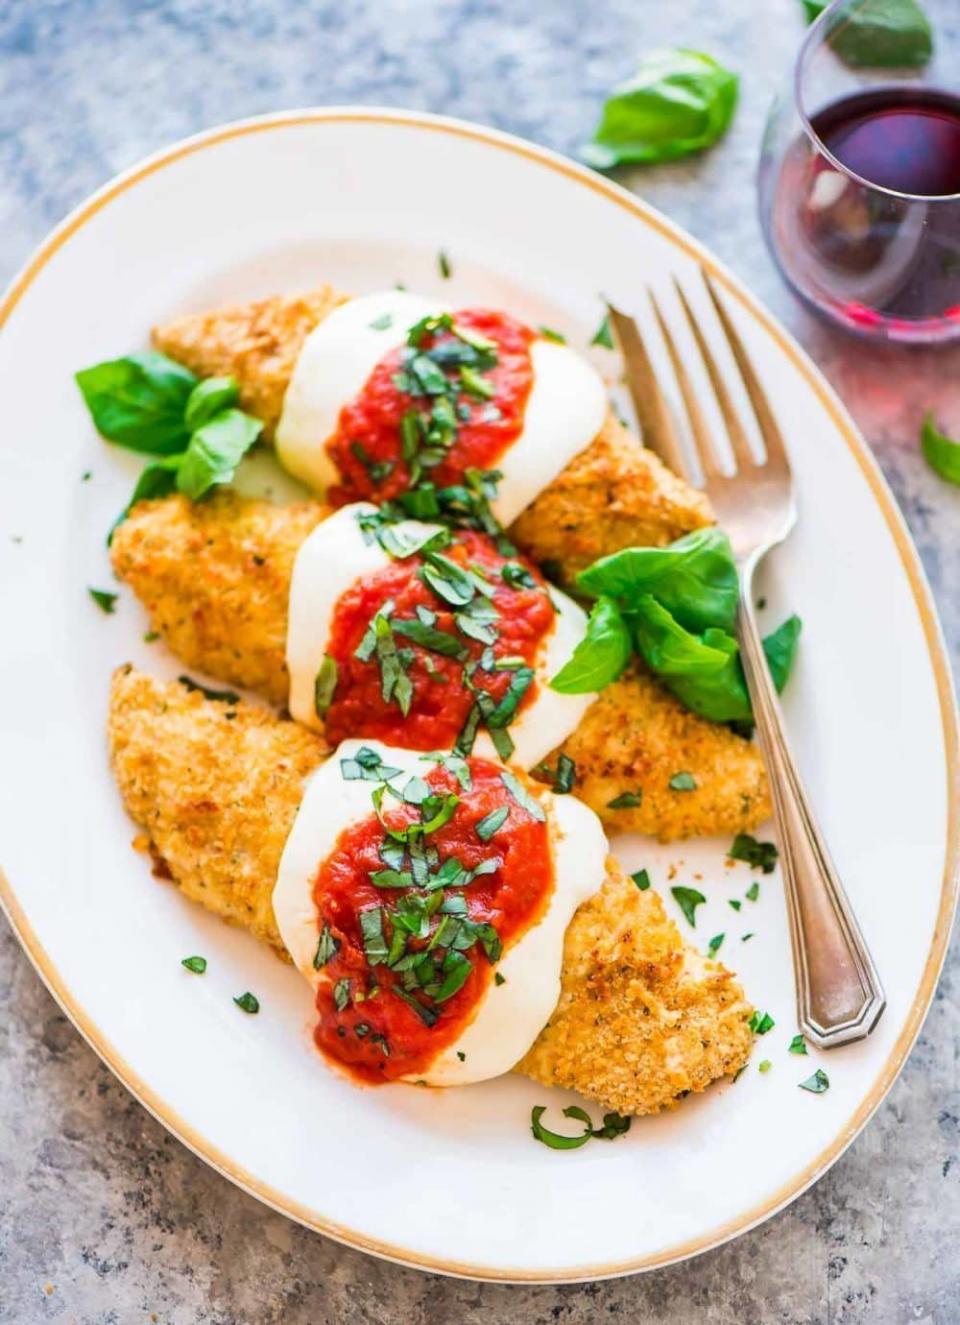 <strong>Get the <a href="https://www.wellplated.com/baked-chicken-parmesan/" target="_blank">Baked Chicken Parmesan</a> recipe from Well Plated</strong>